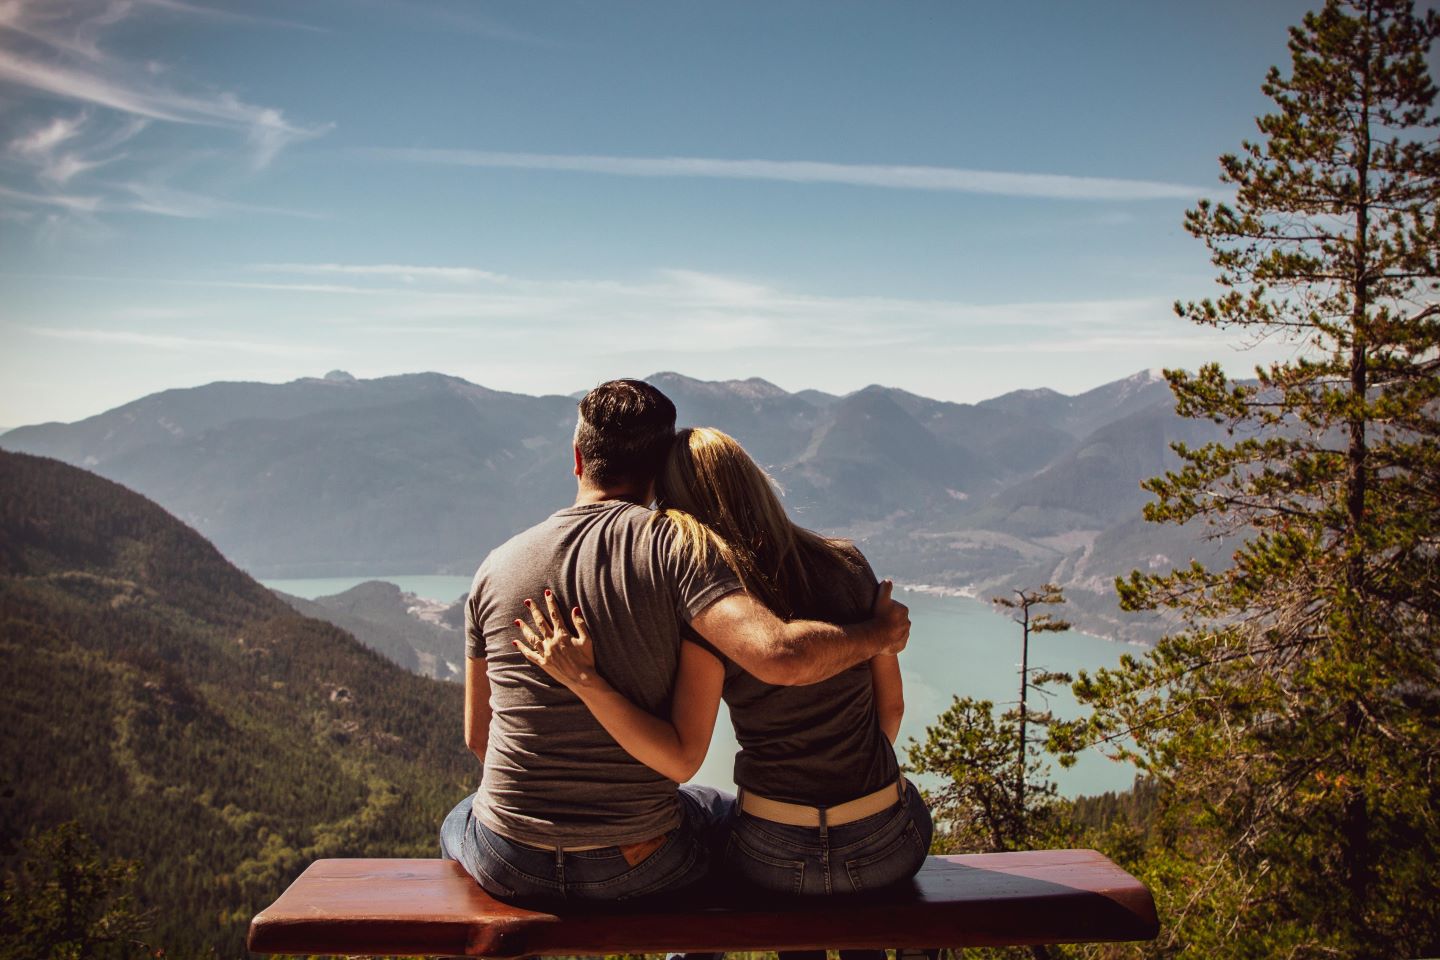 Two individuals sit on a bench overlooking a lush mountain landscape with a serene lake. They embrace, one’s arm around the other, gazing at the view.